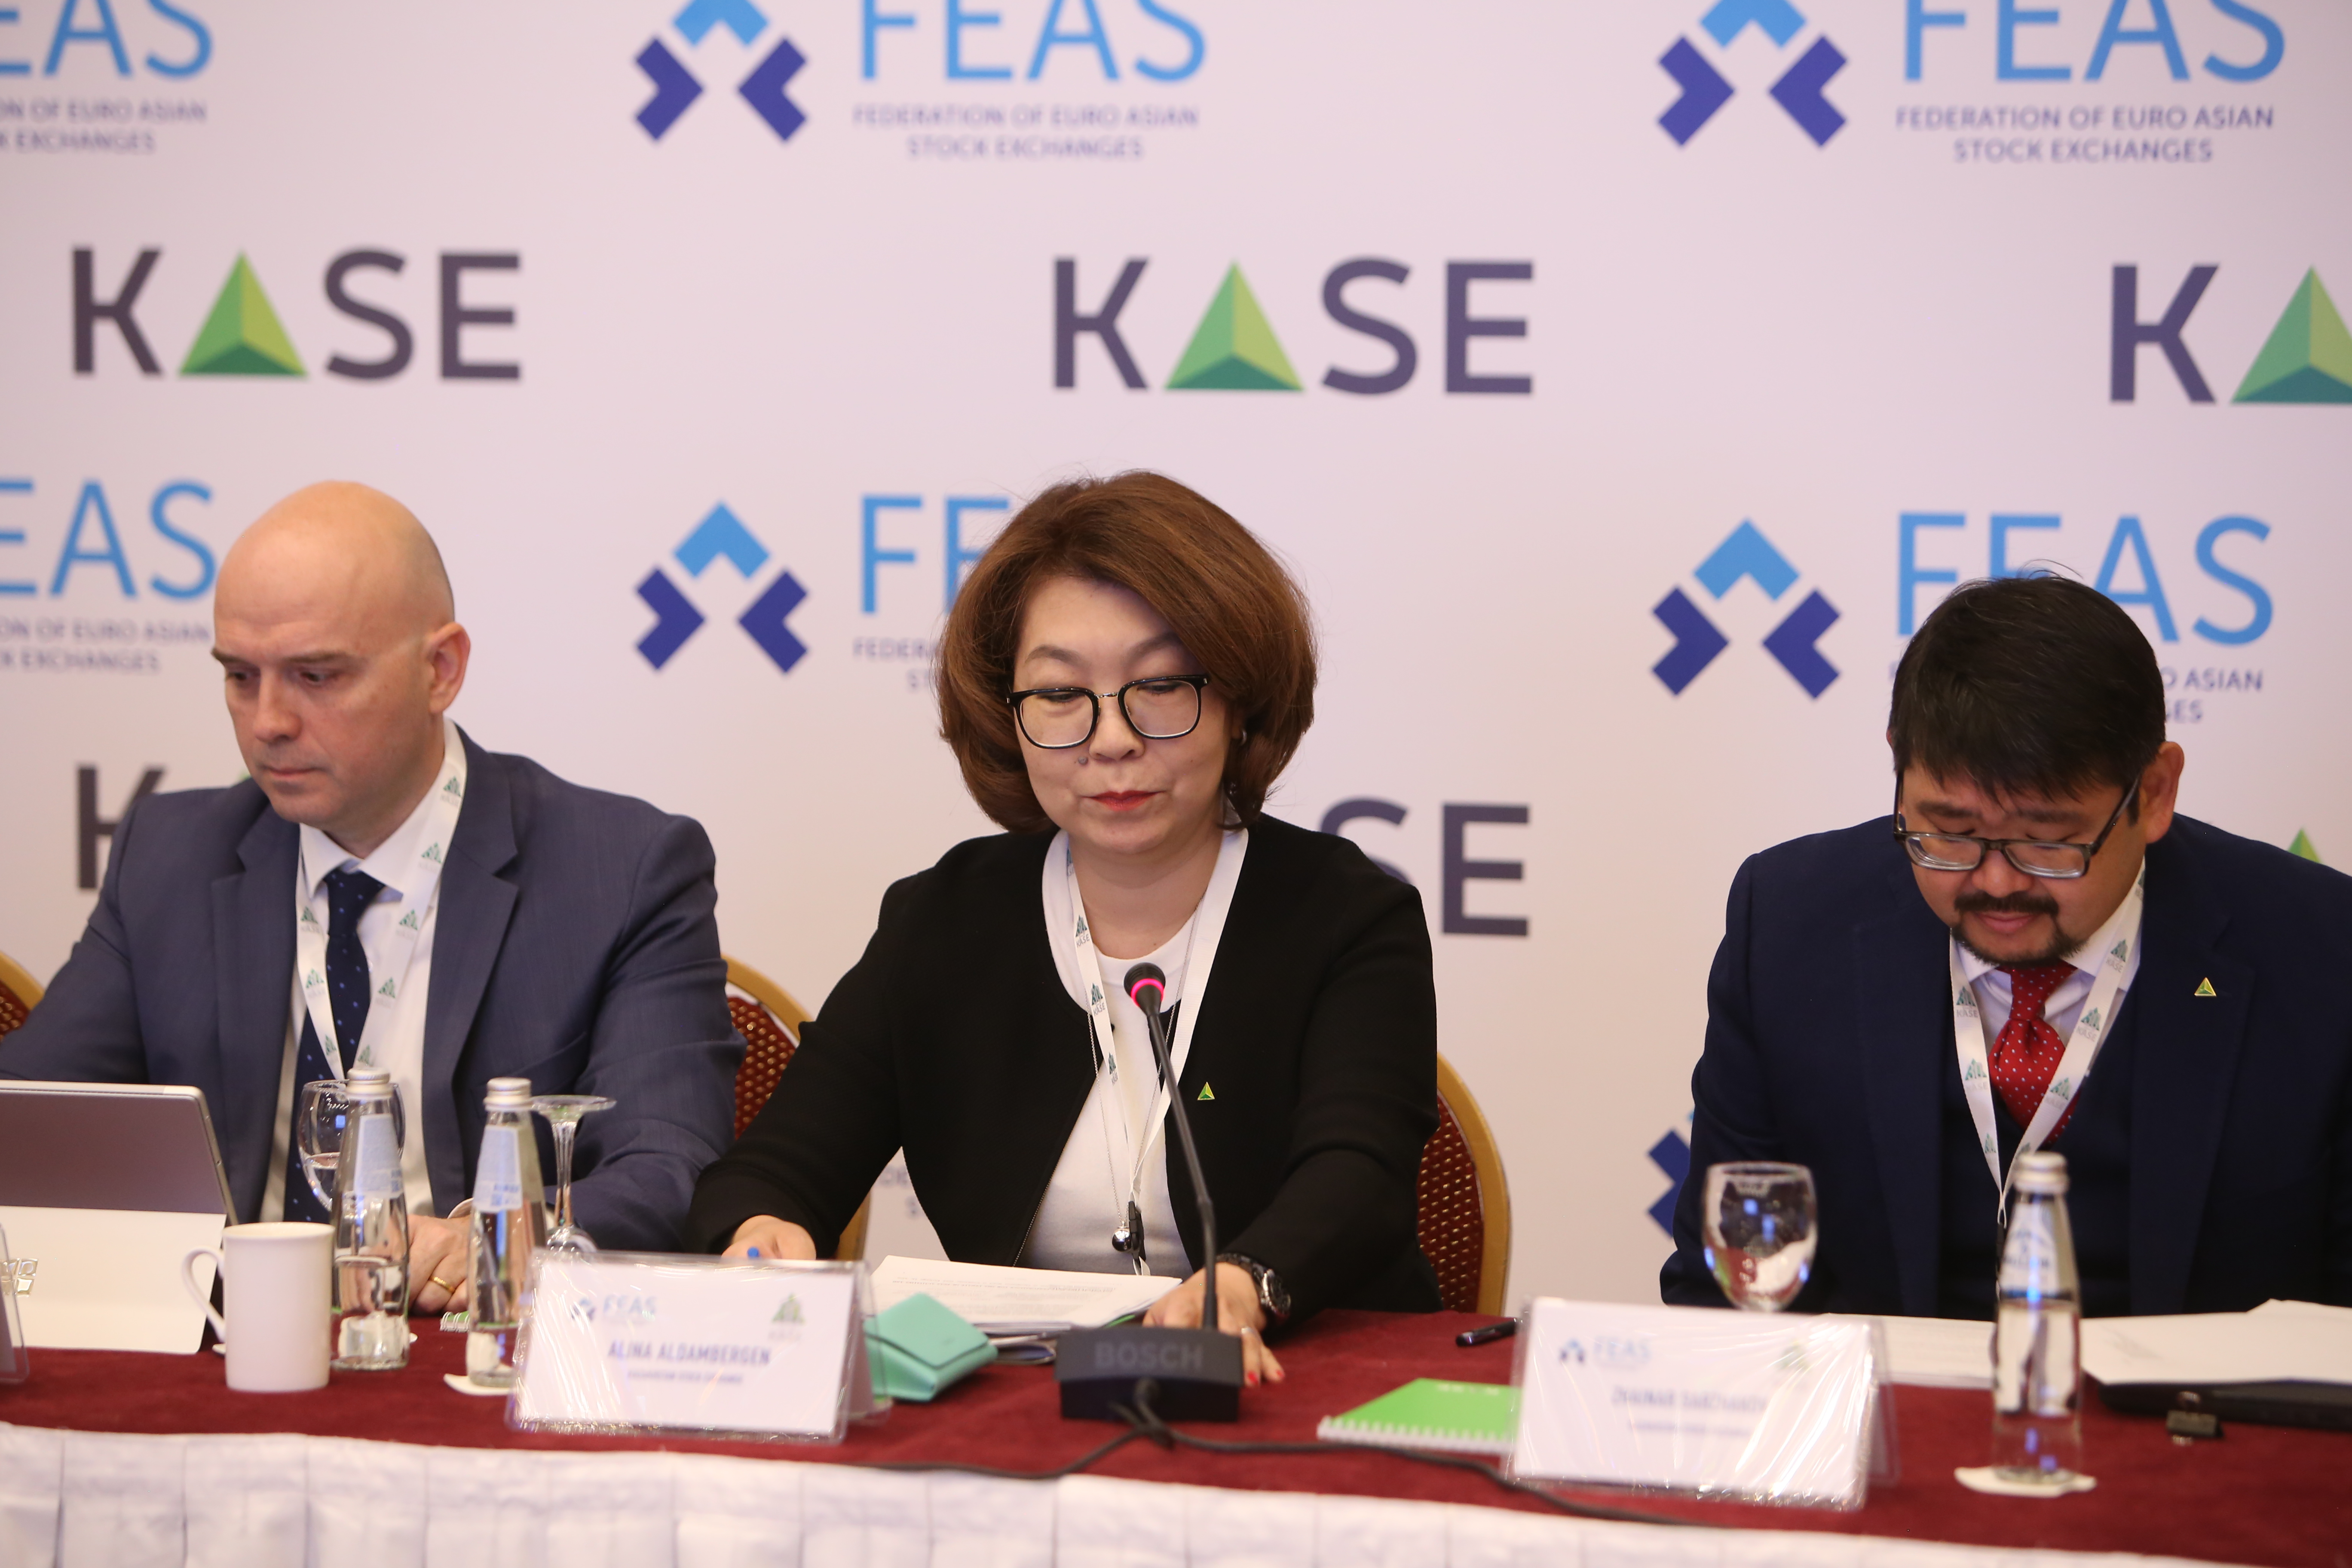 KASE hosted the FEAS General Assembly